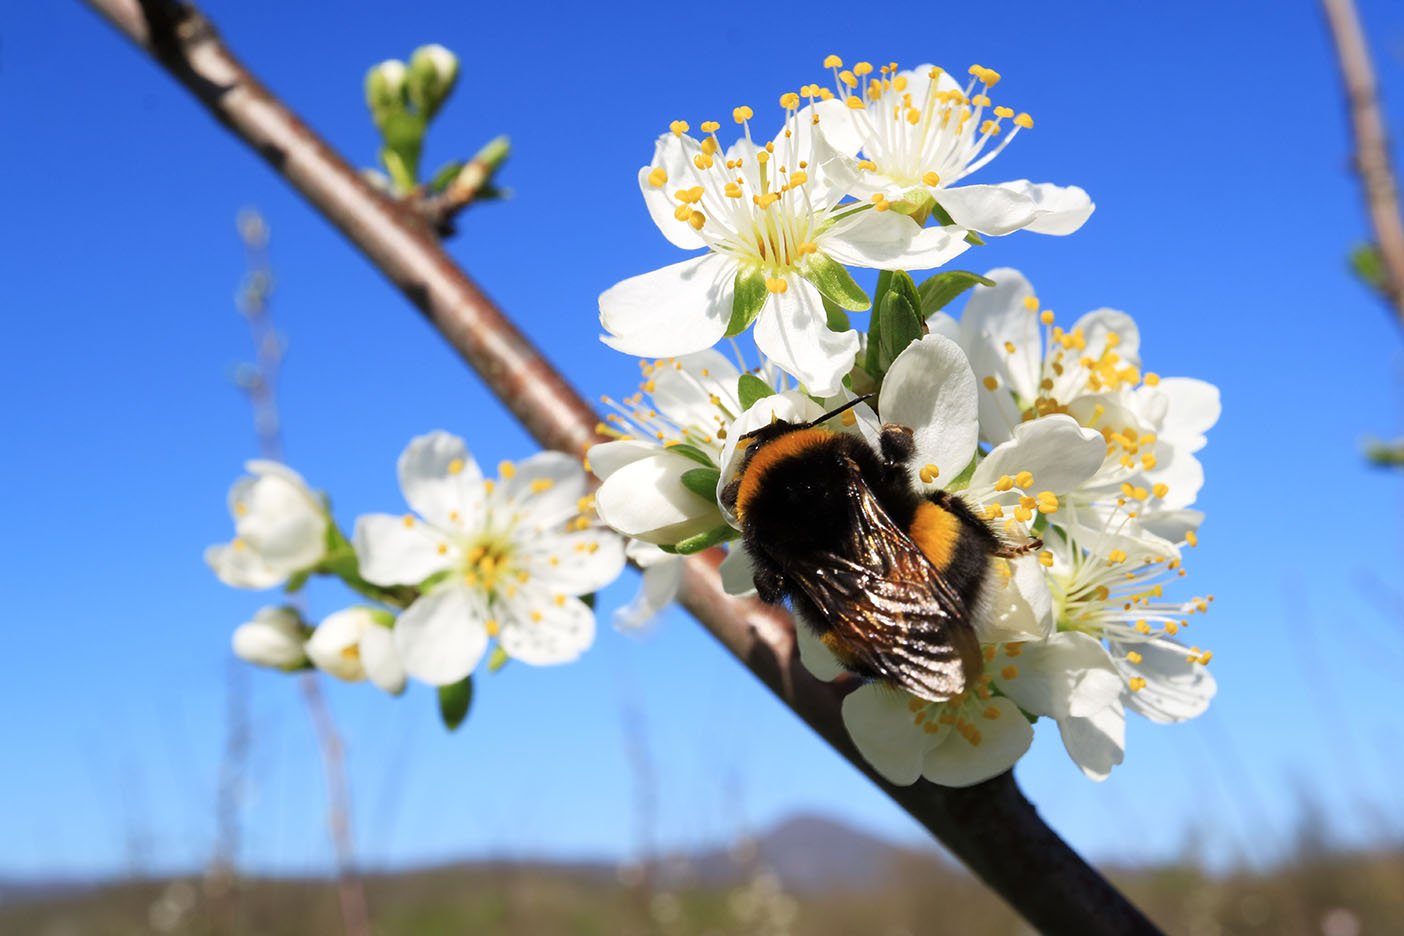 Bumblebee pollinating apple blossom in an orchard